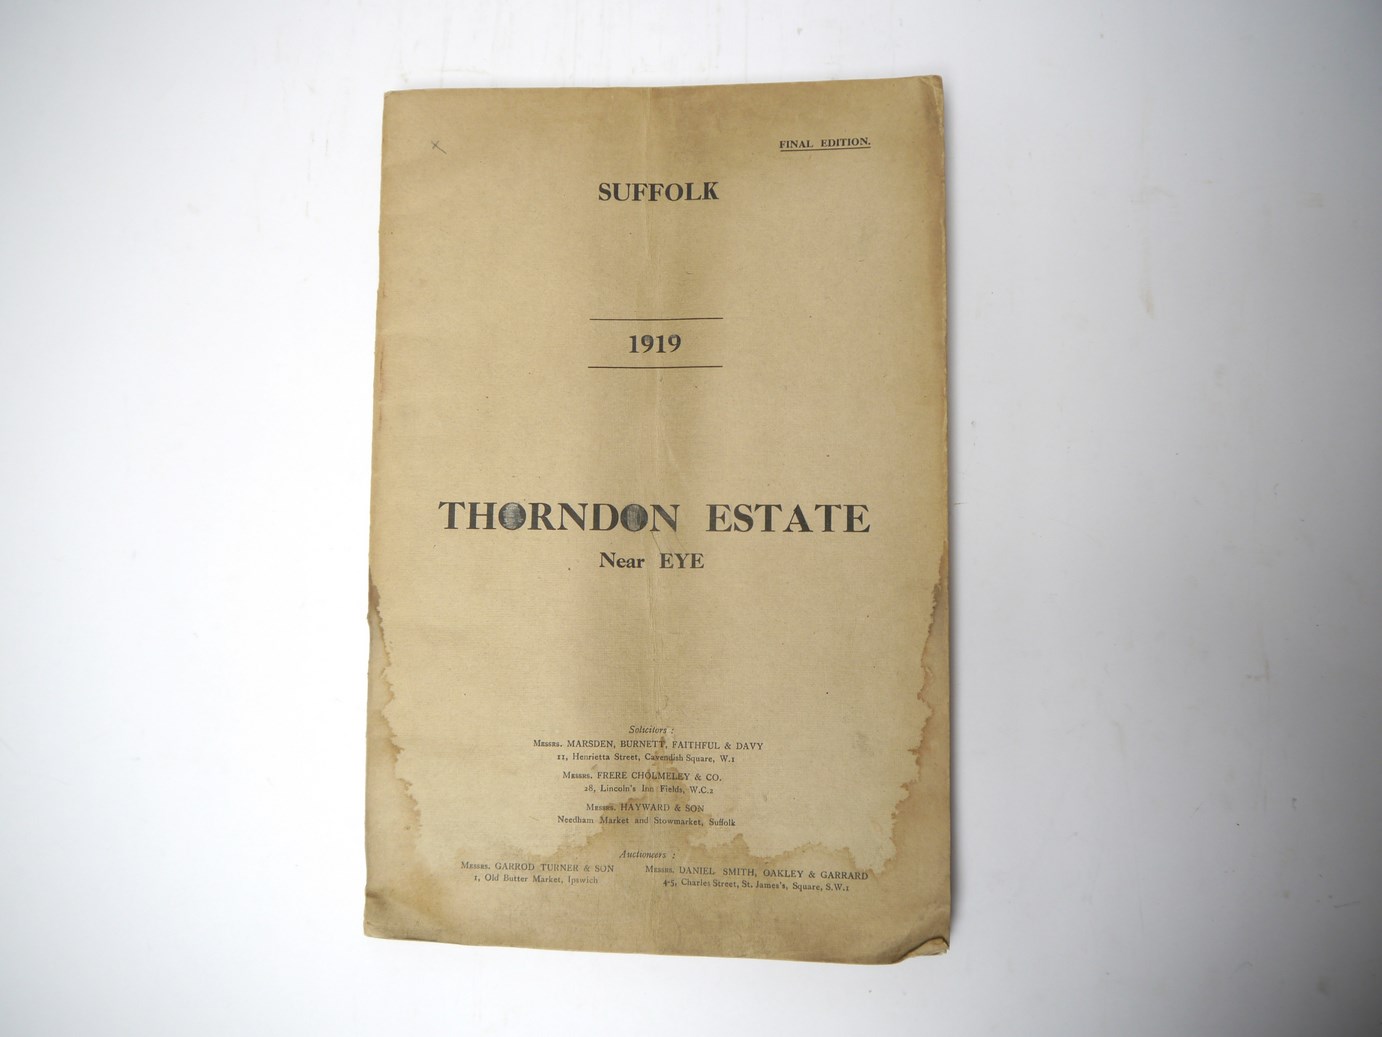 'Thorndon Estate, Comprising Twelve Good Farms... - Suffolk, Four miles South of Eye... - Image 2 of 5